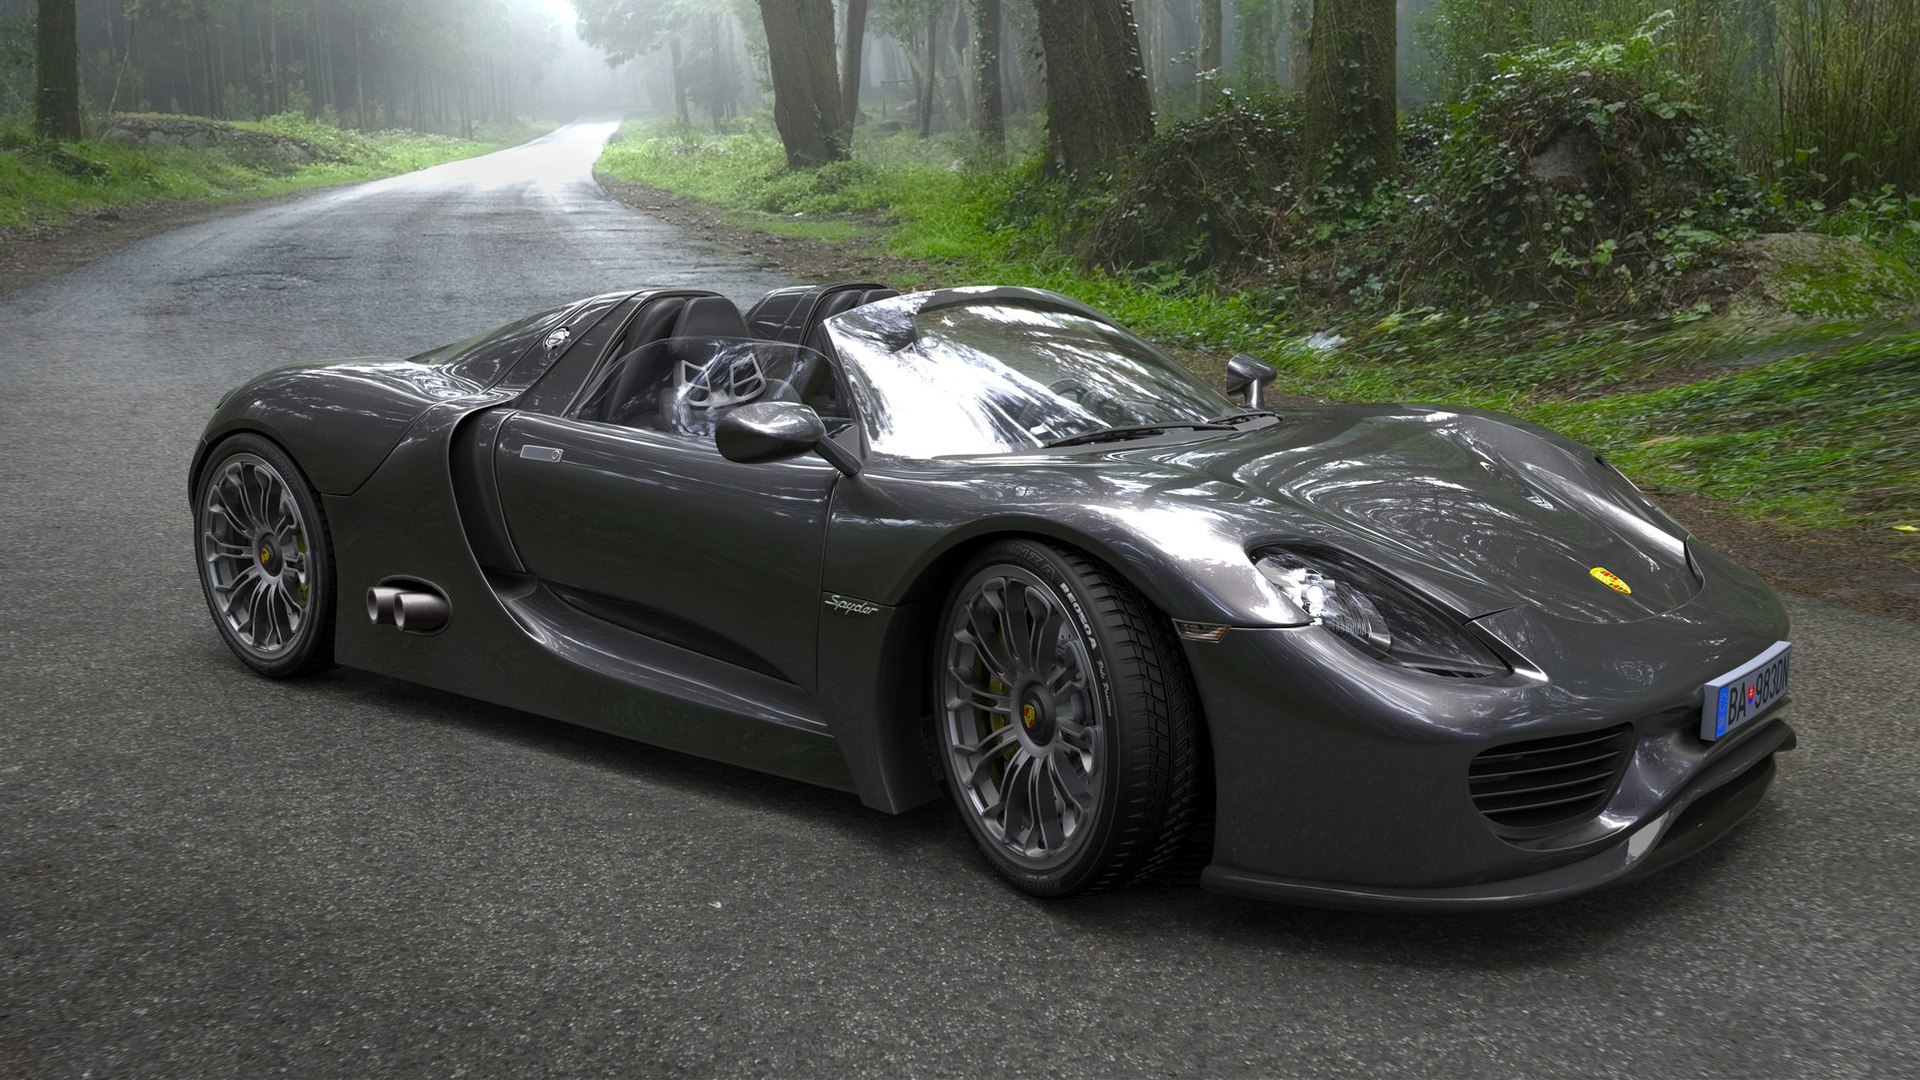 Double Car Porsche Spyder wallpapers and images wallpapers